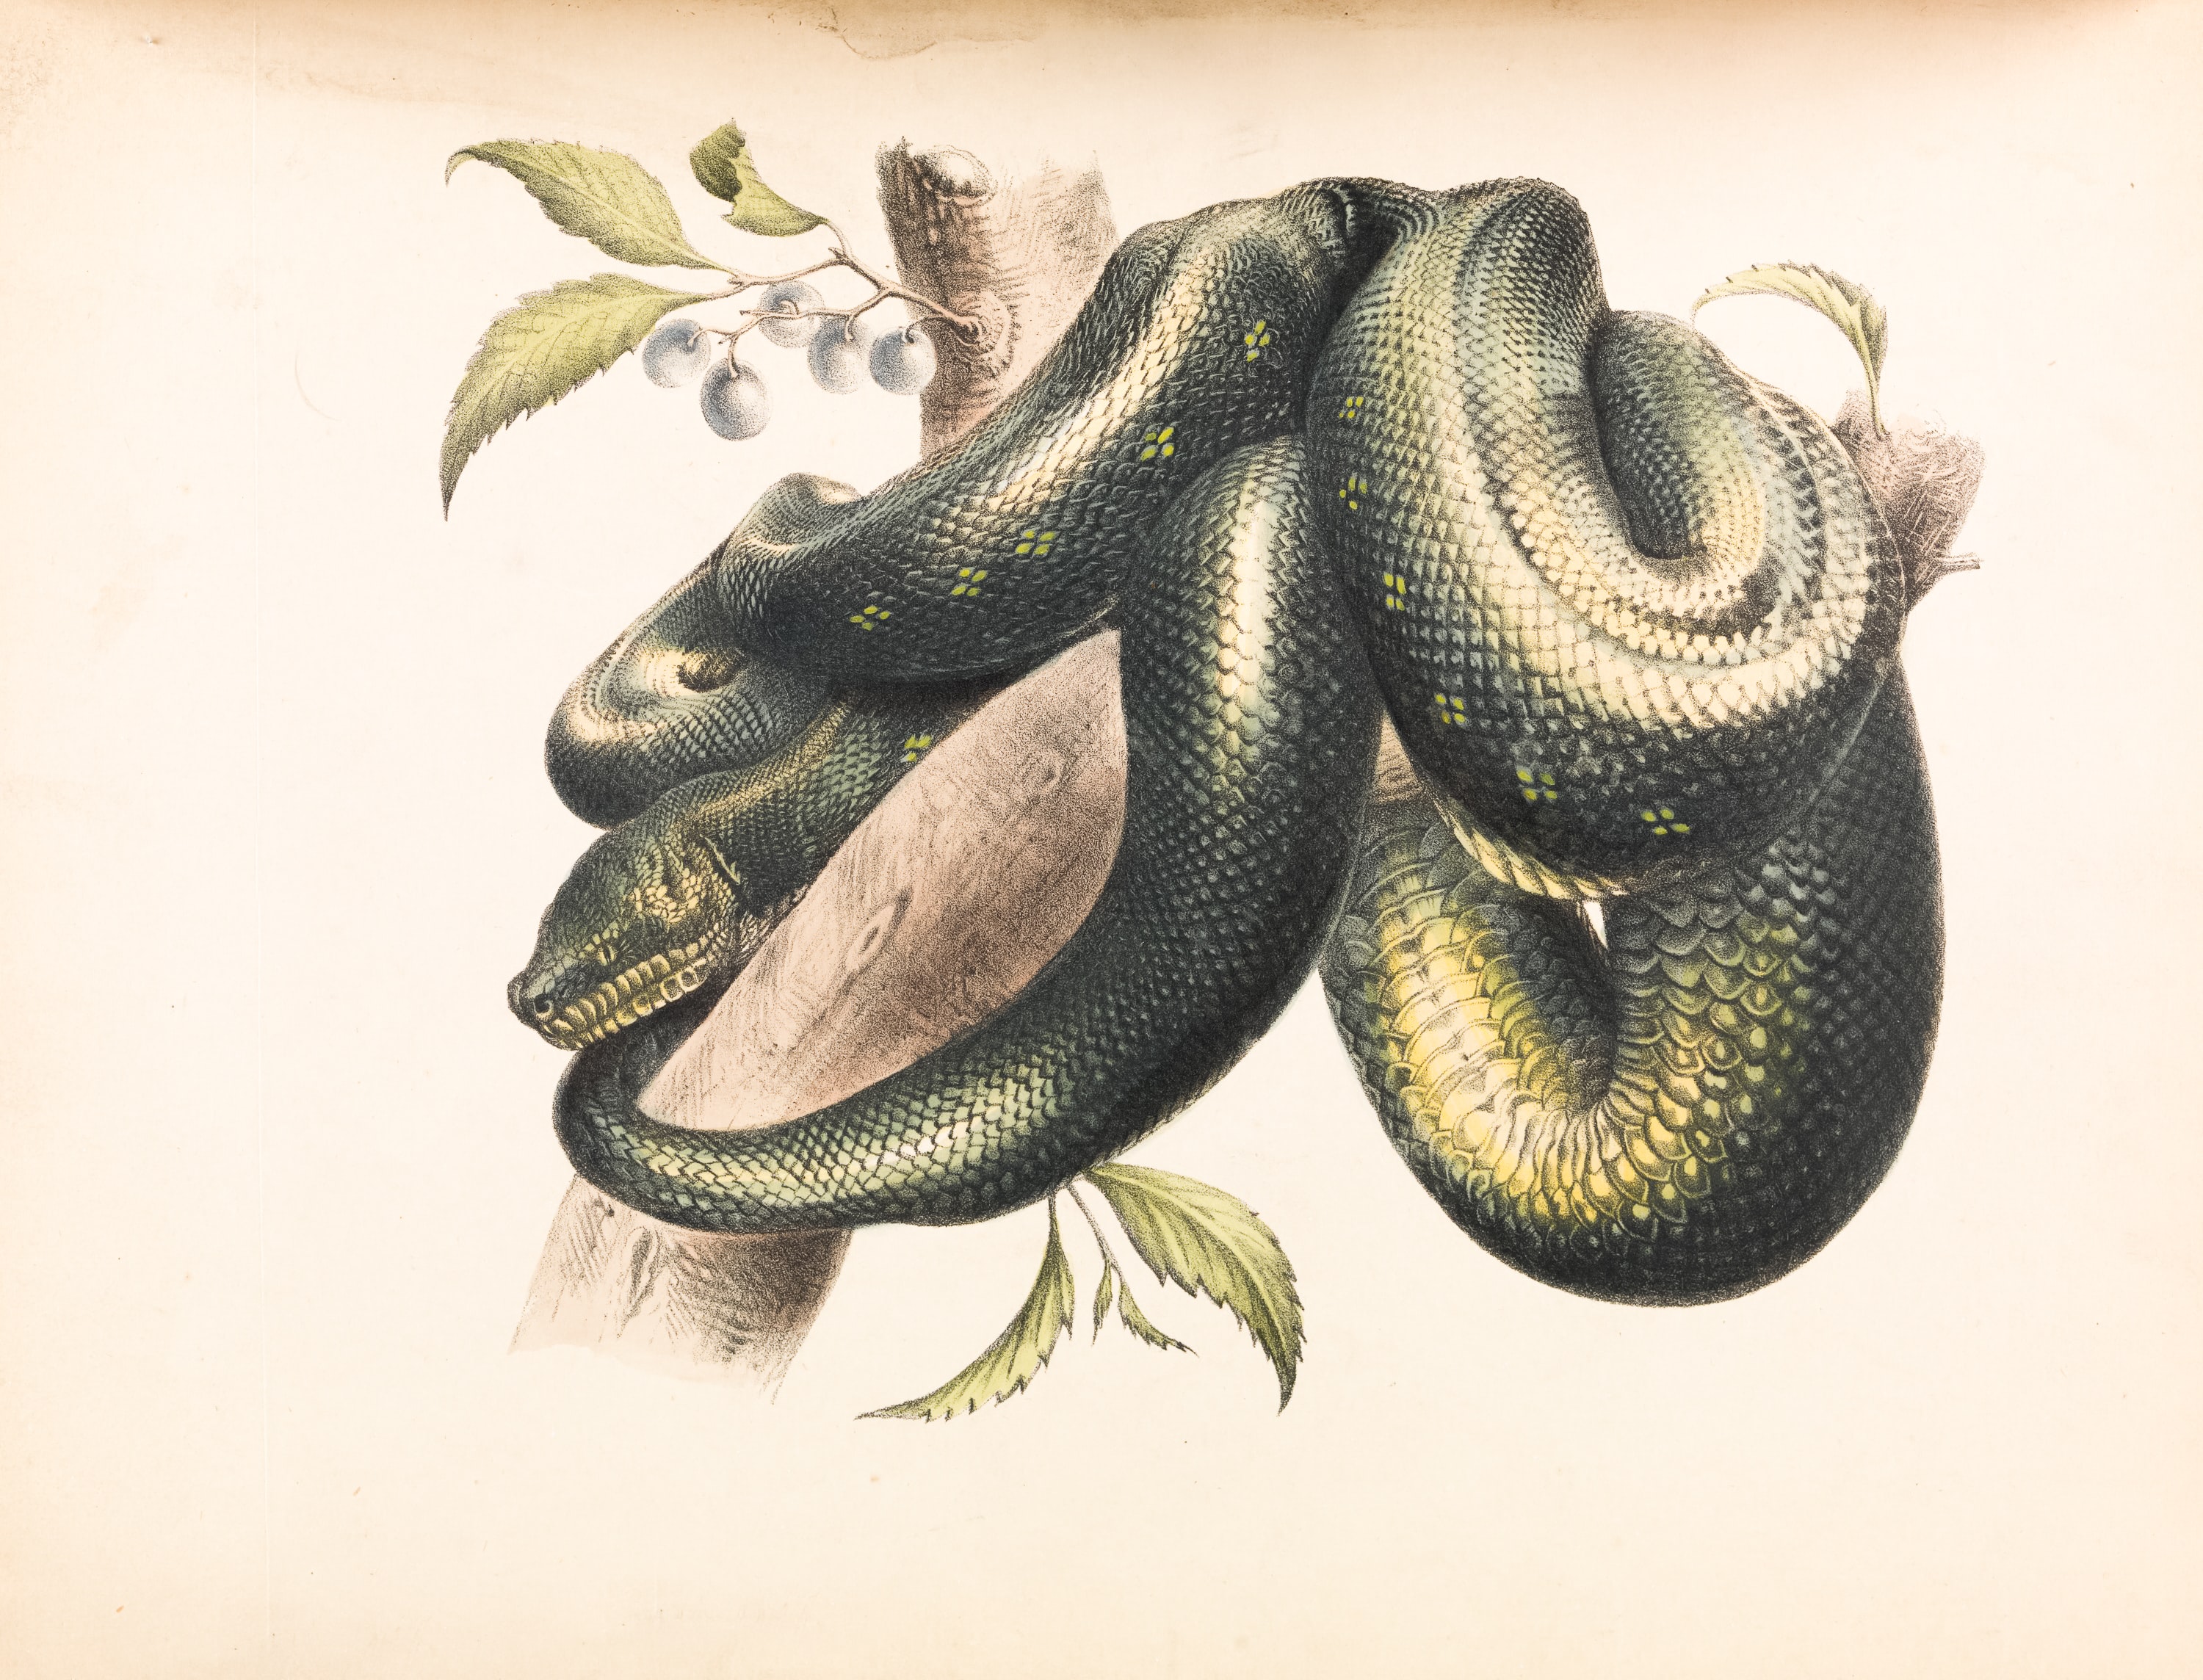 Image of an Illustration of snake wrapped around branch